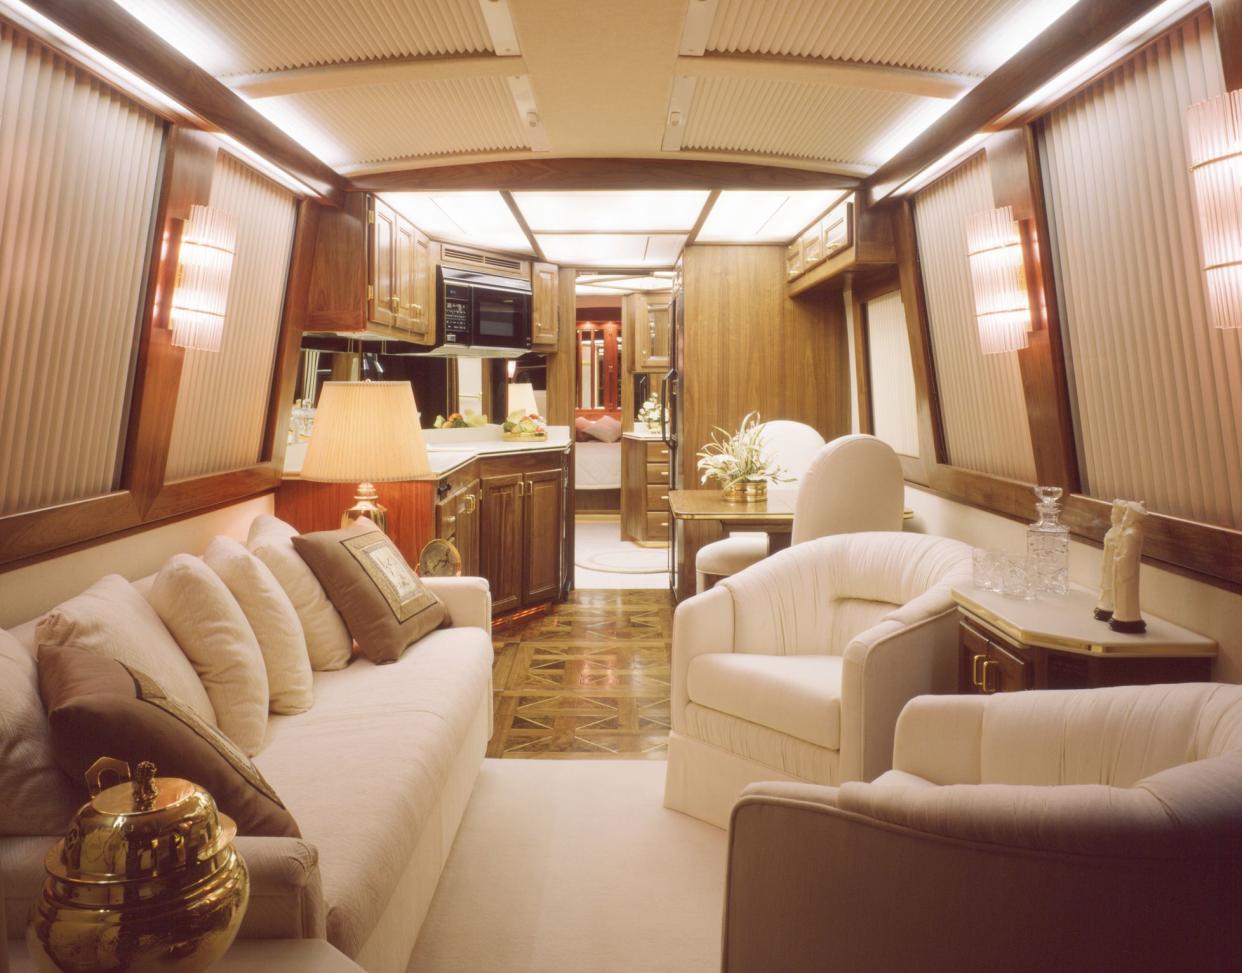 This image is a 40' luxury bus motor home interior view looking from the front to rear.